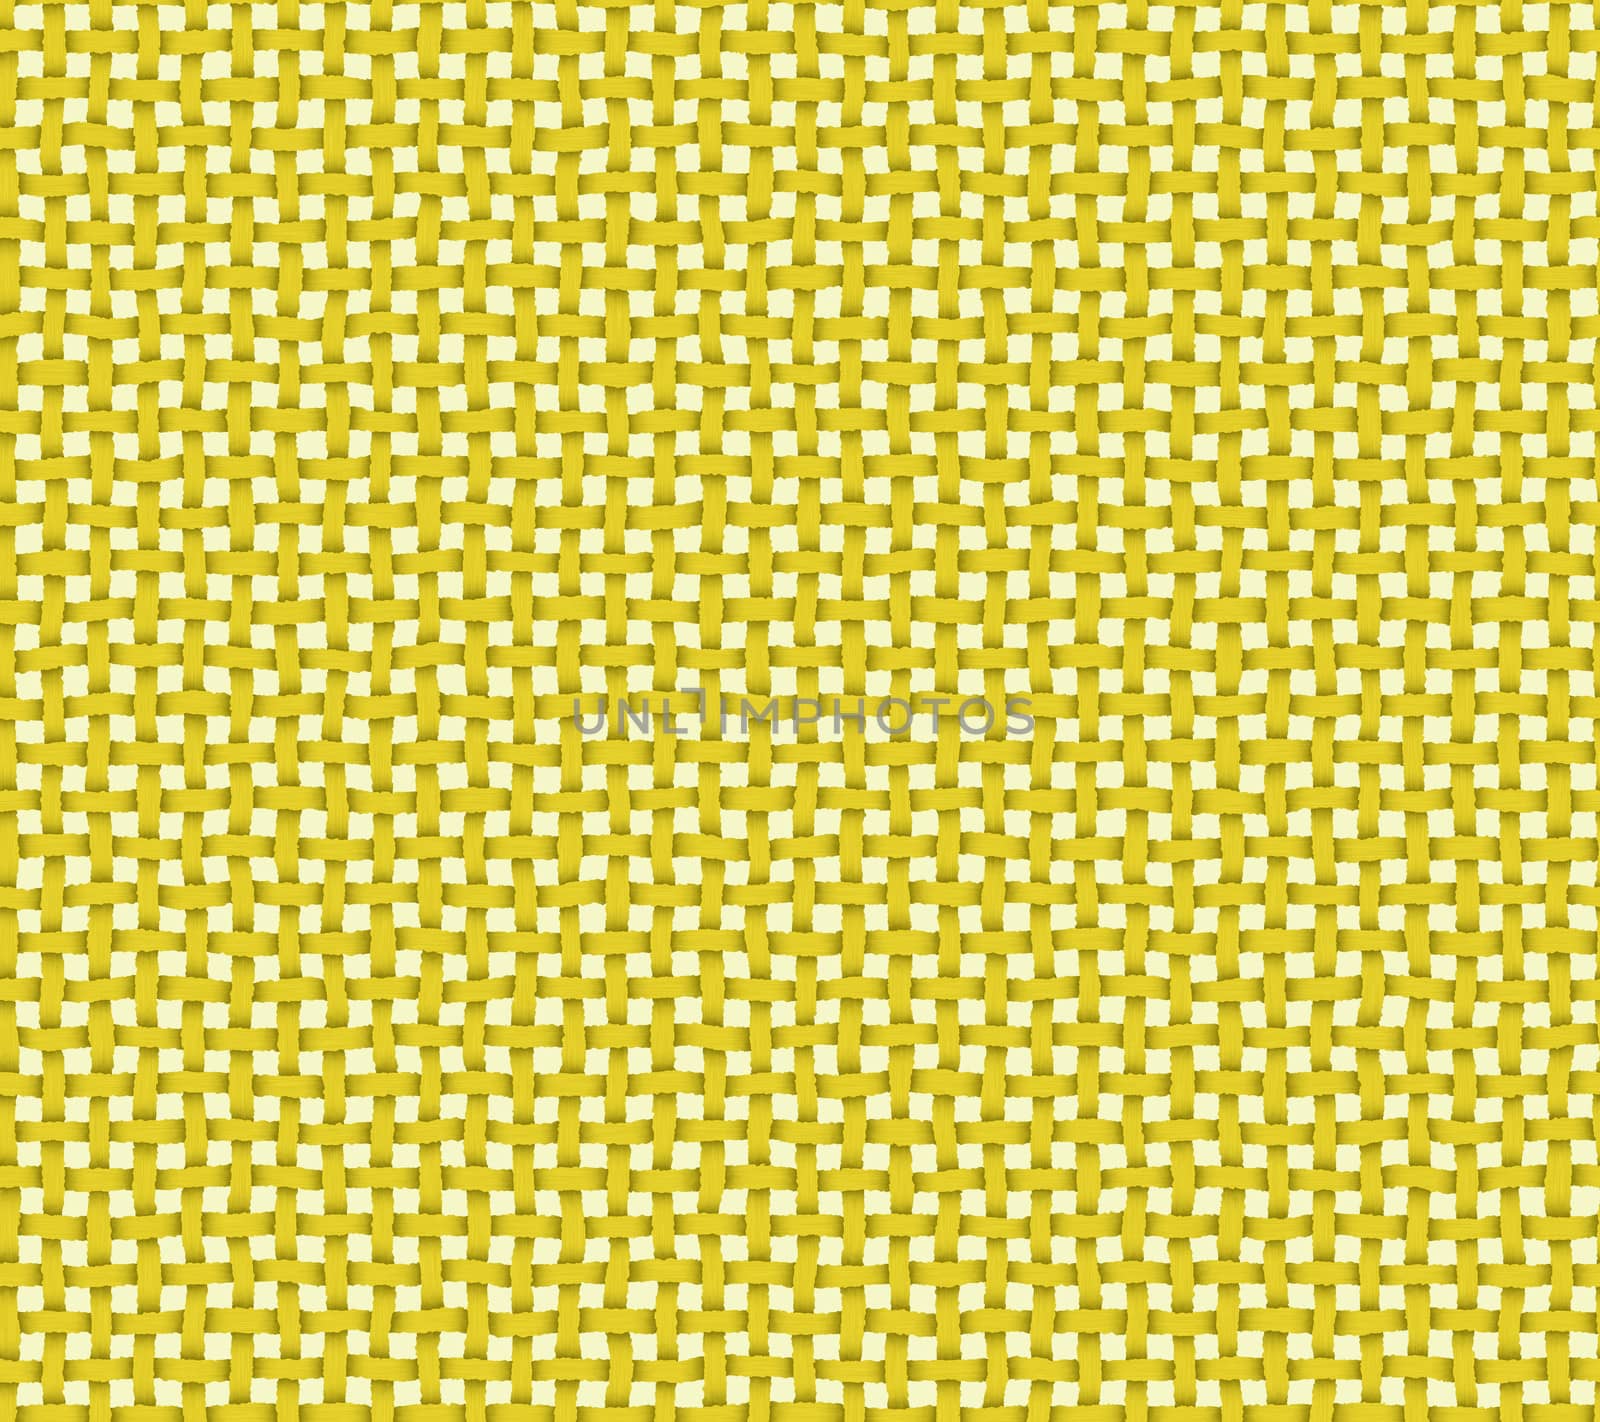 Vintage yellow country checkered background.